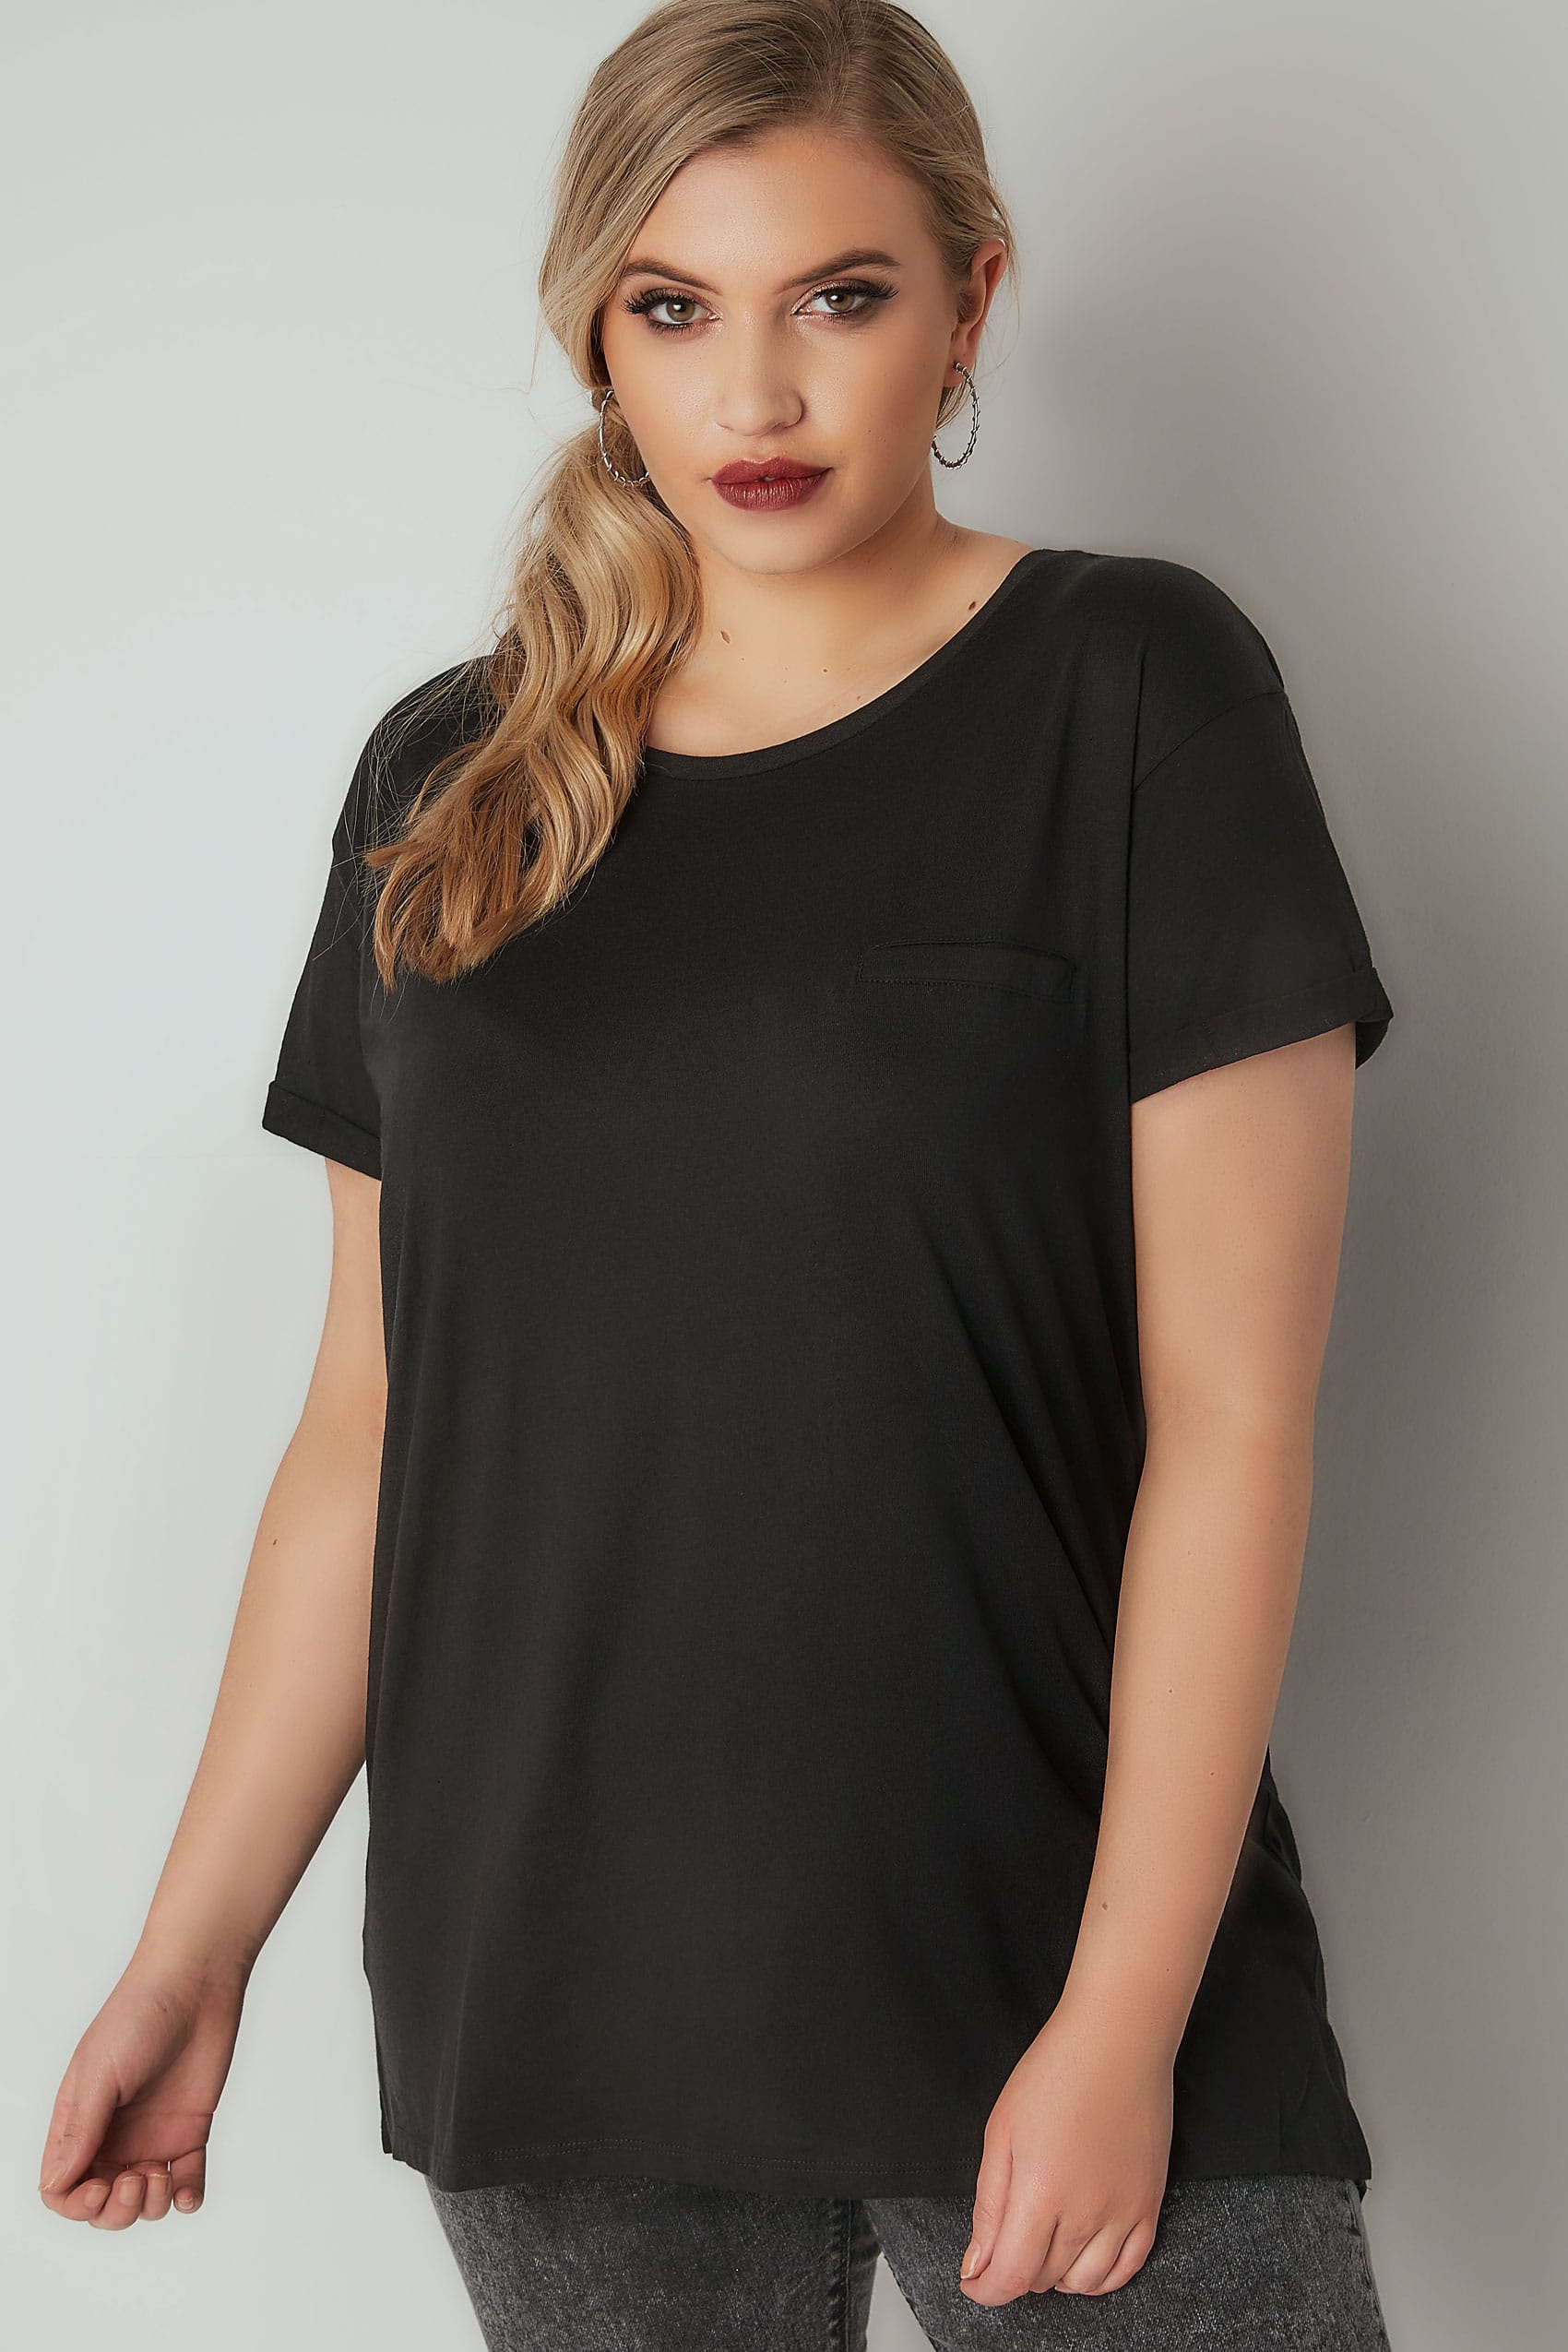 Download Black Pocket T-Shirt With Curved Hem, Plus size 16 to 36